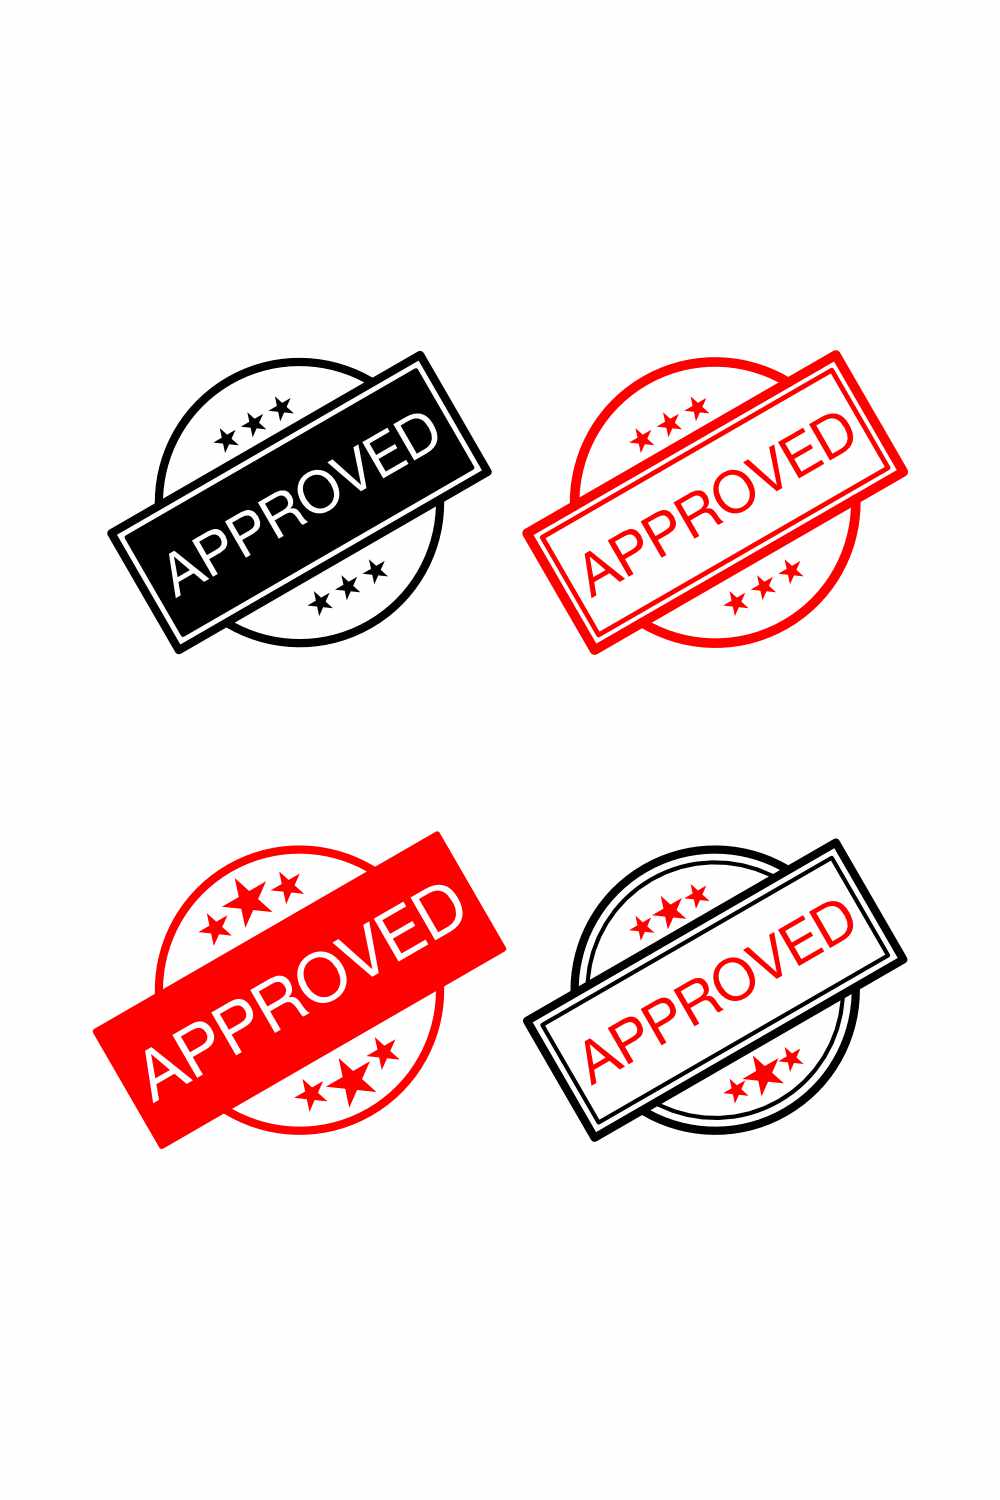 Approval Stamp Badge - preview of Pinterest image.